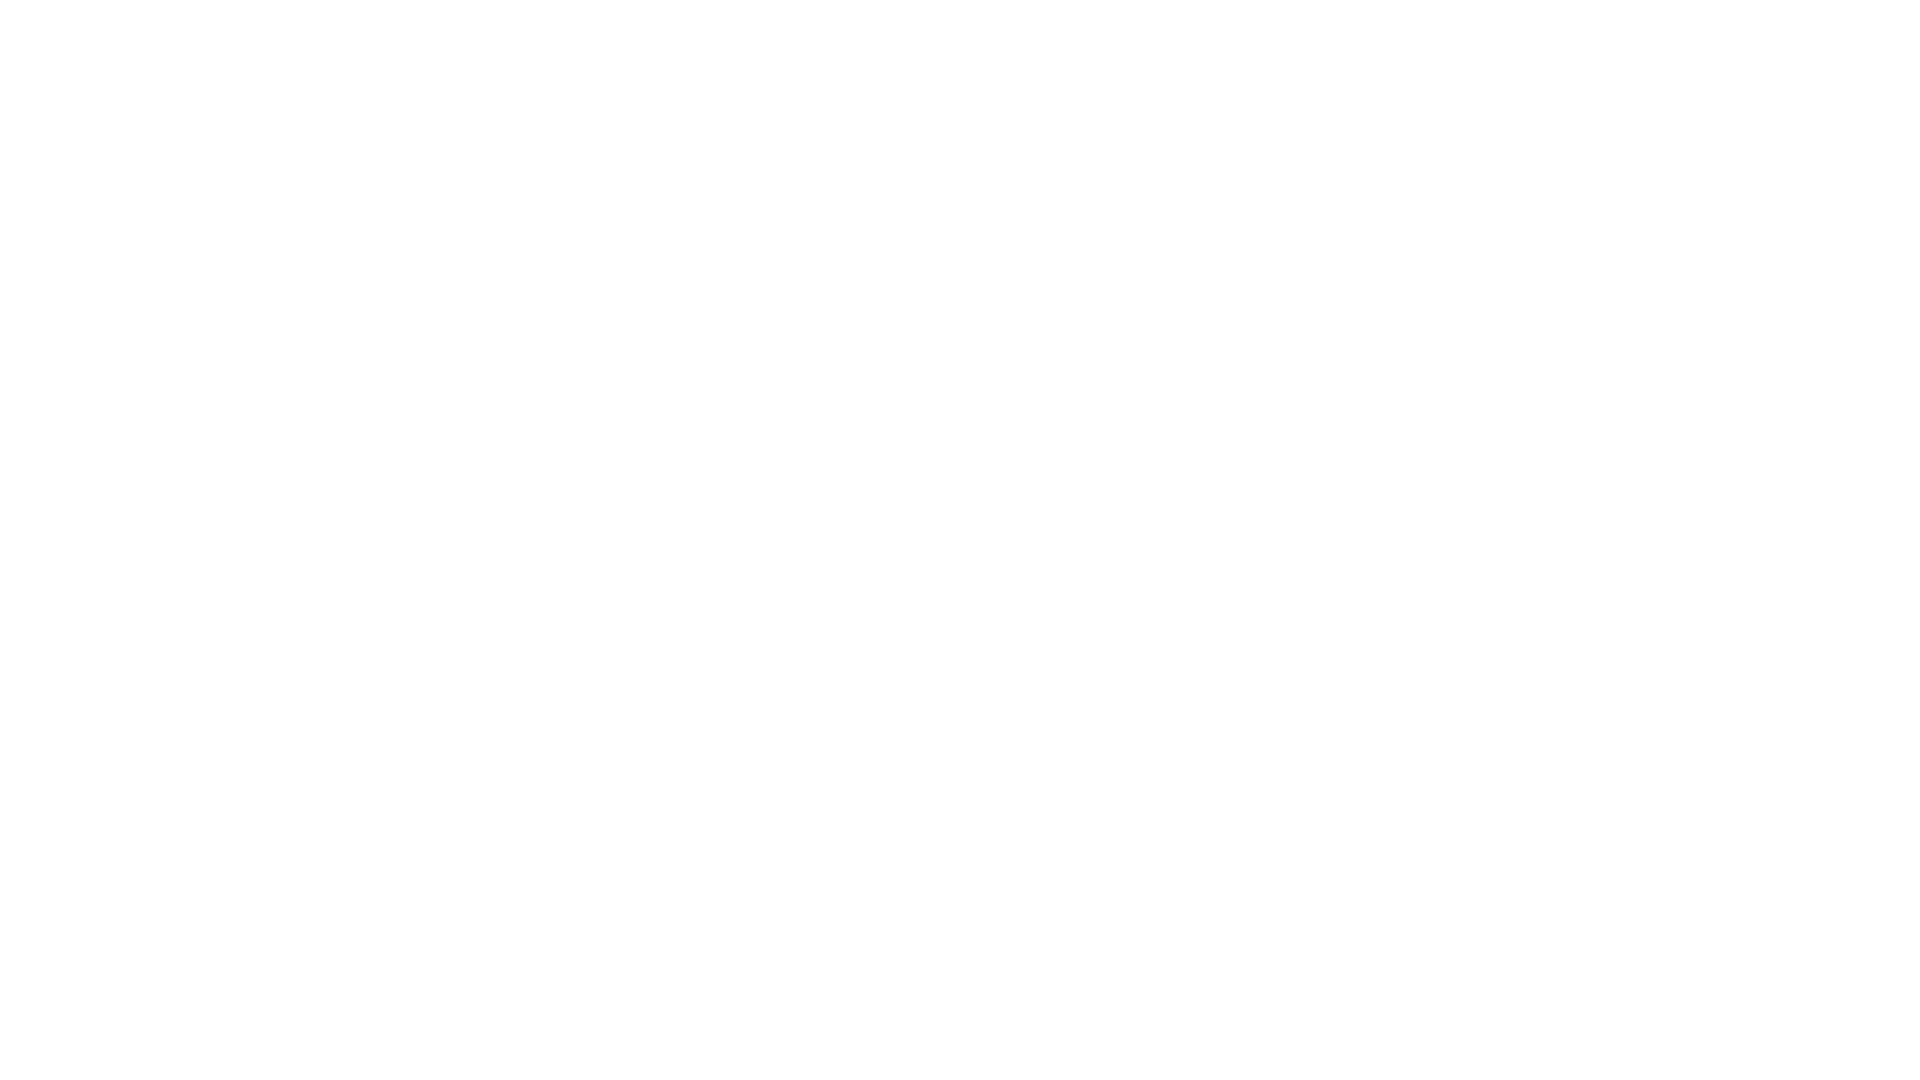 The Front Leadership logo